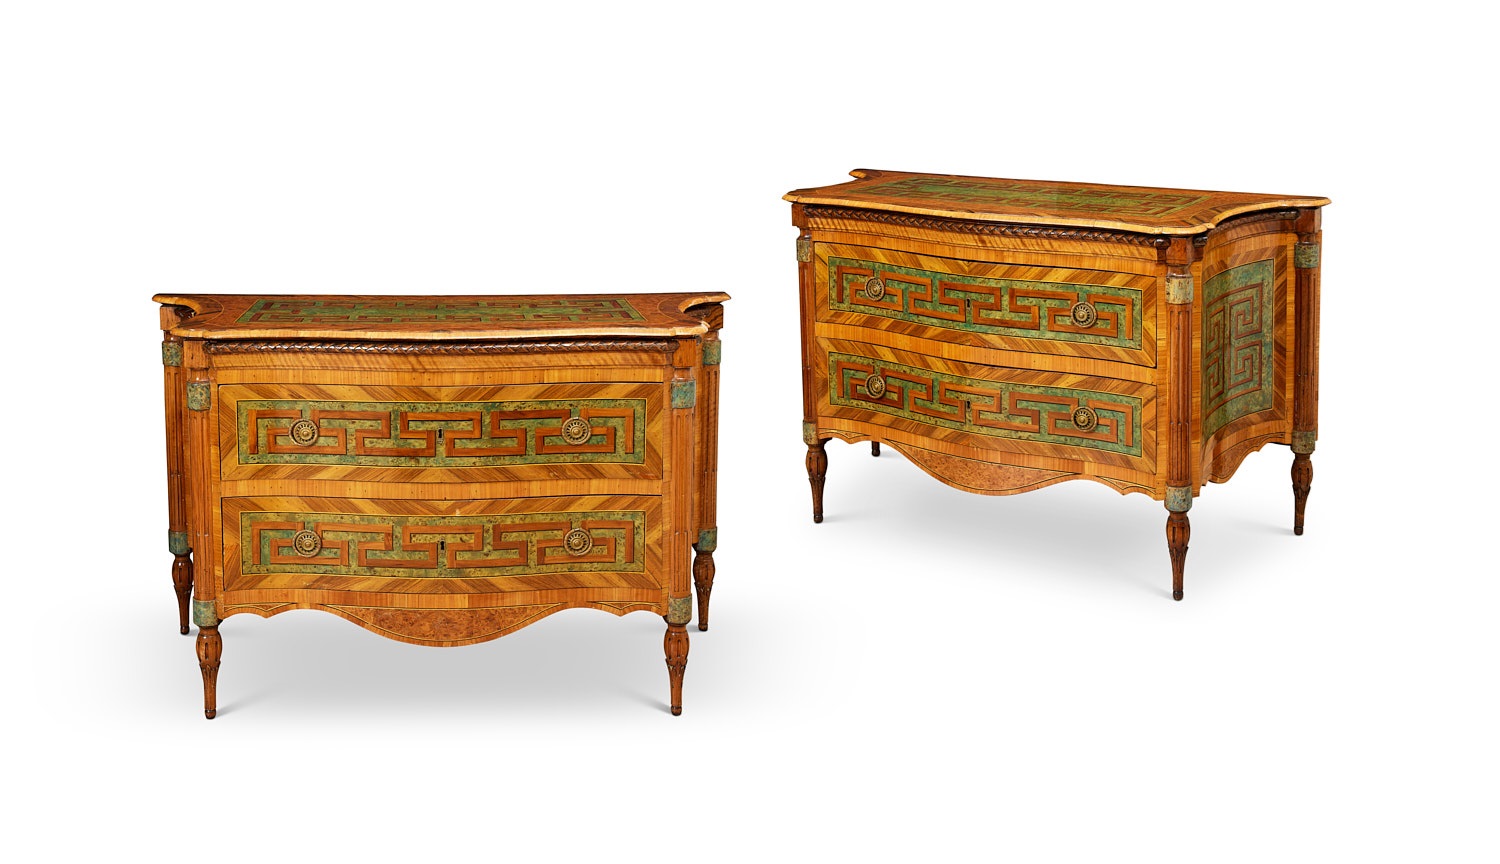 A FINE PAIR OF 18TH CENTURY ITALIAN NEO-CLASSICAL PARQUETRY COMMODES